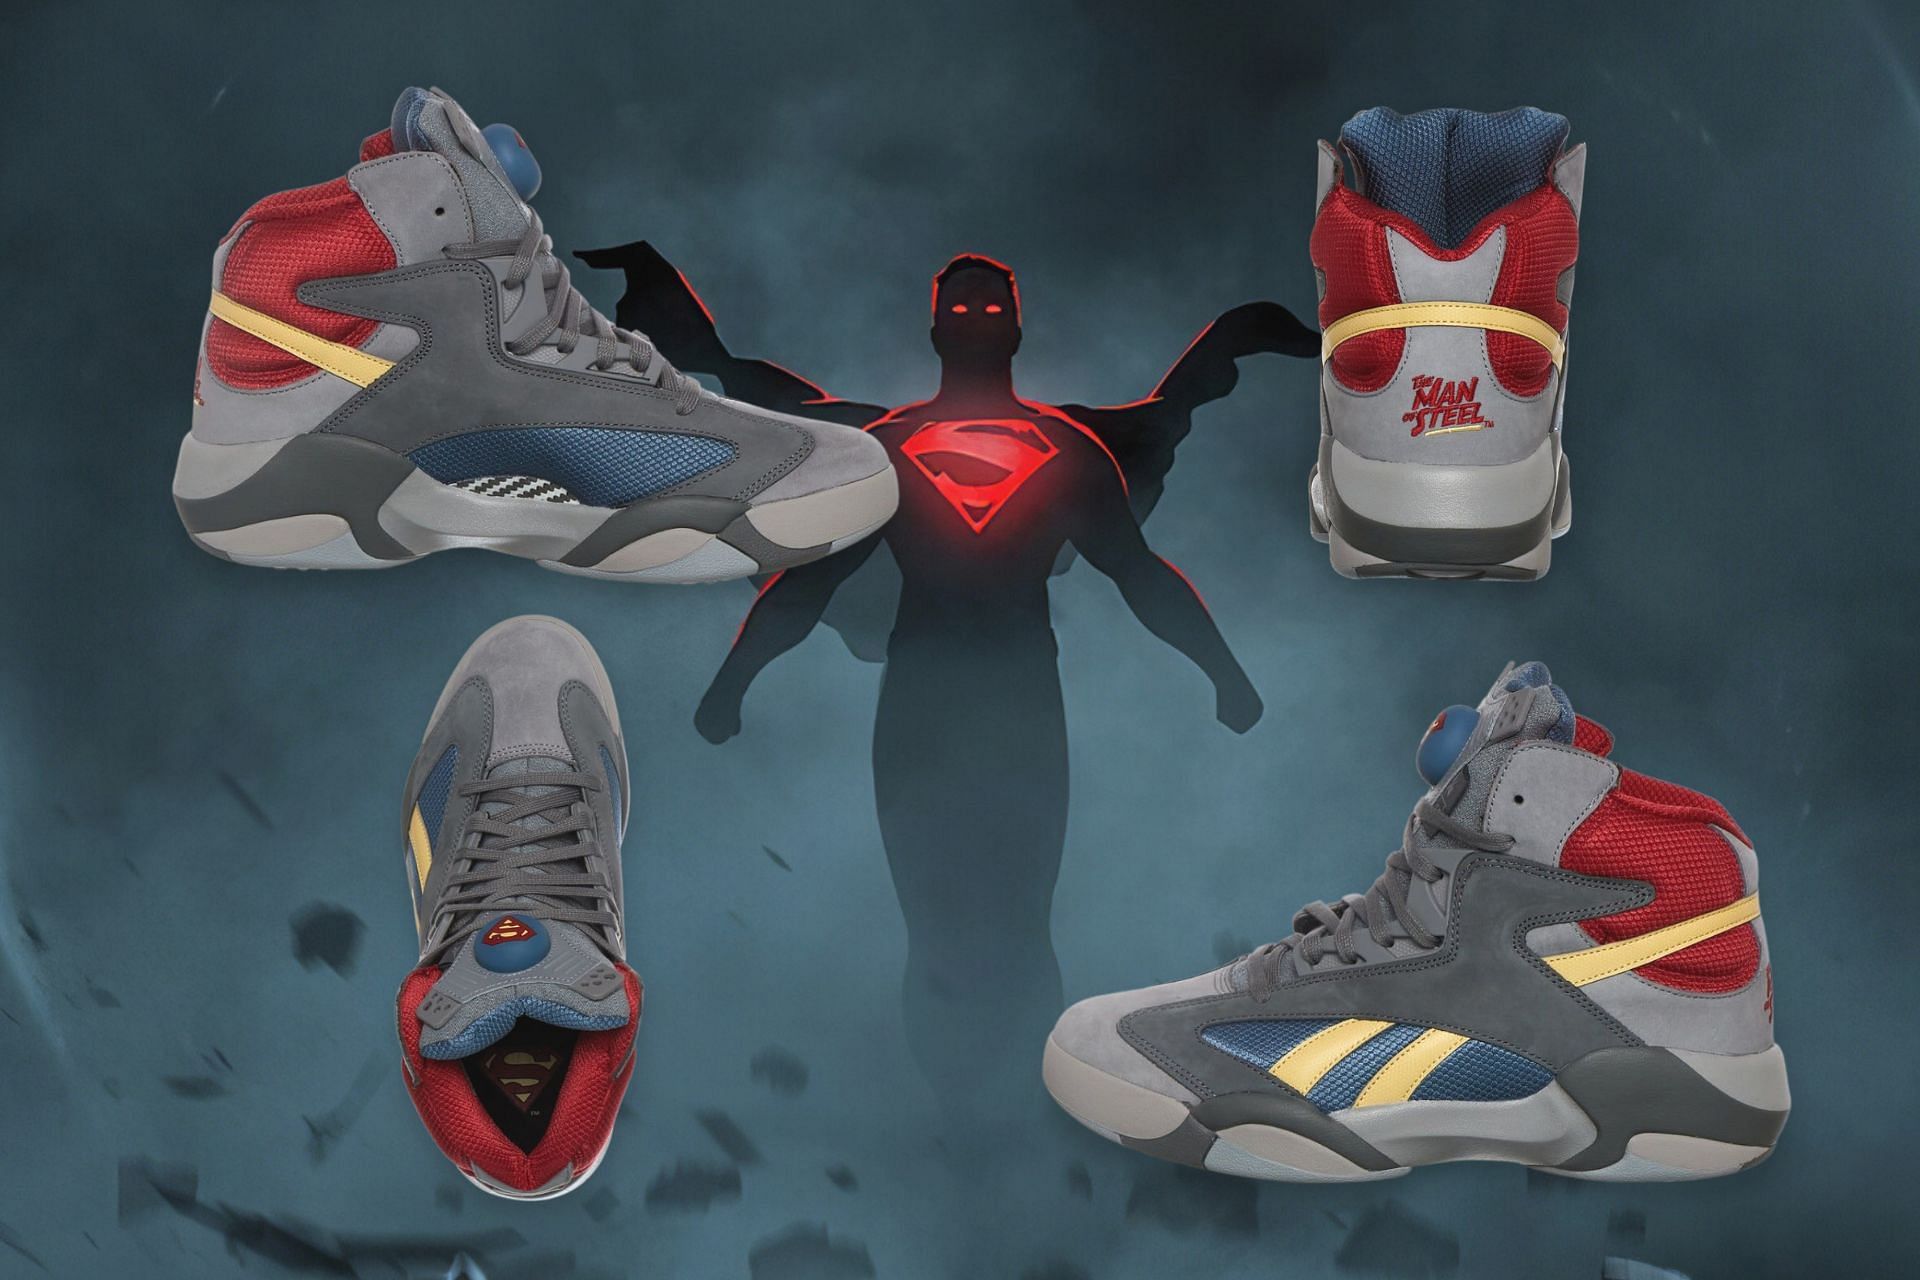 Where to buy DC x Reebok Shaq “Man of Steel” shoes? Price, release date, and more details explored